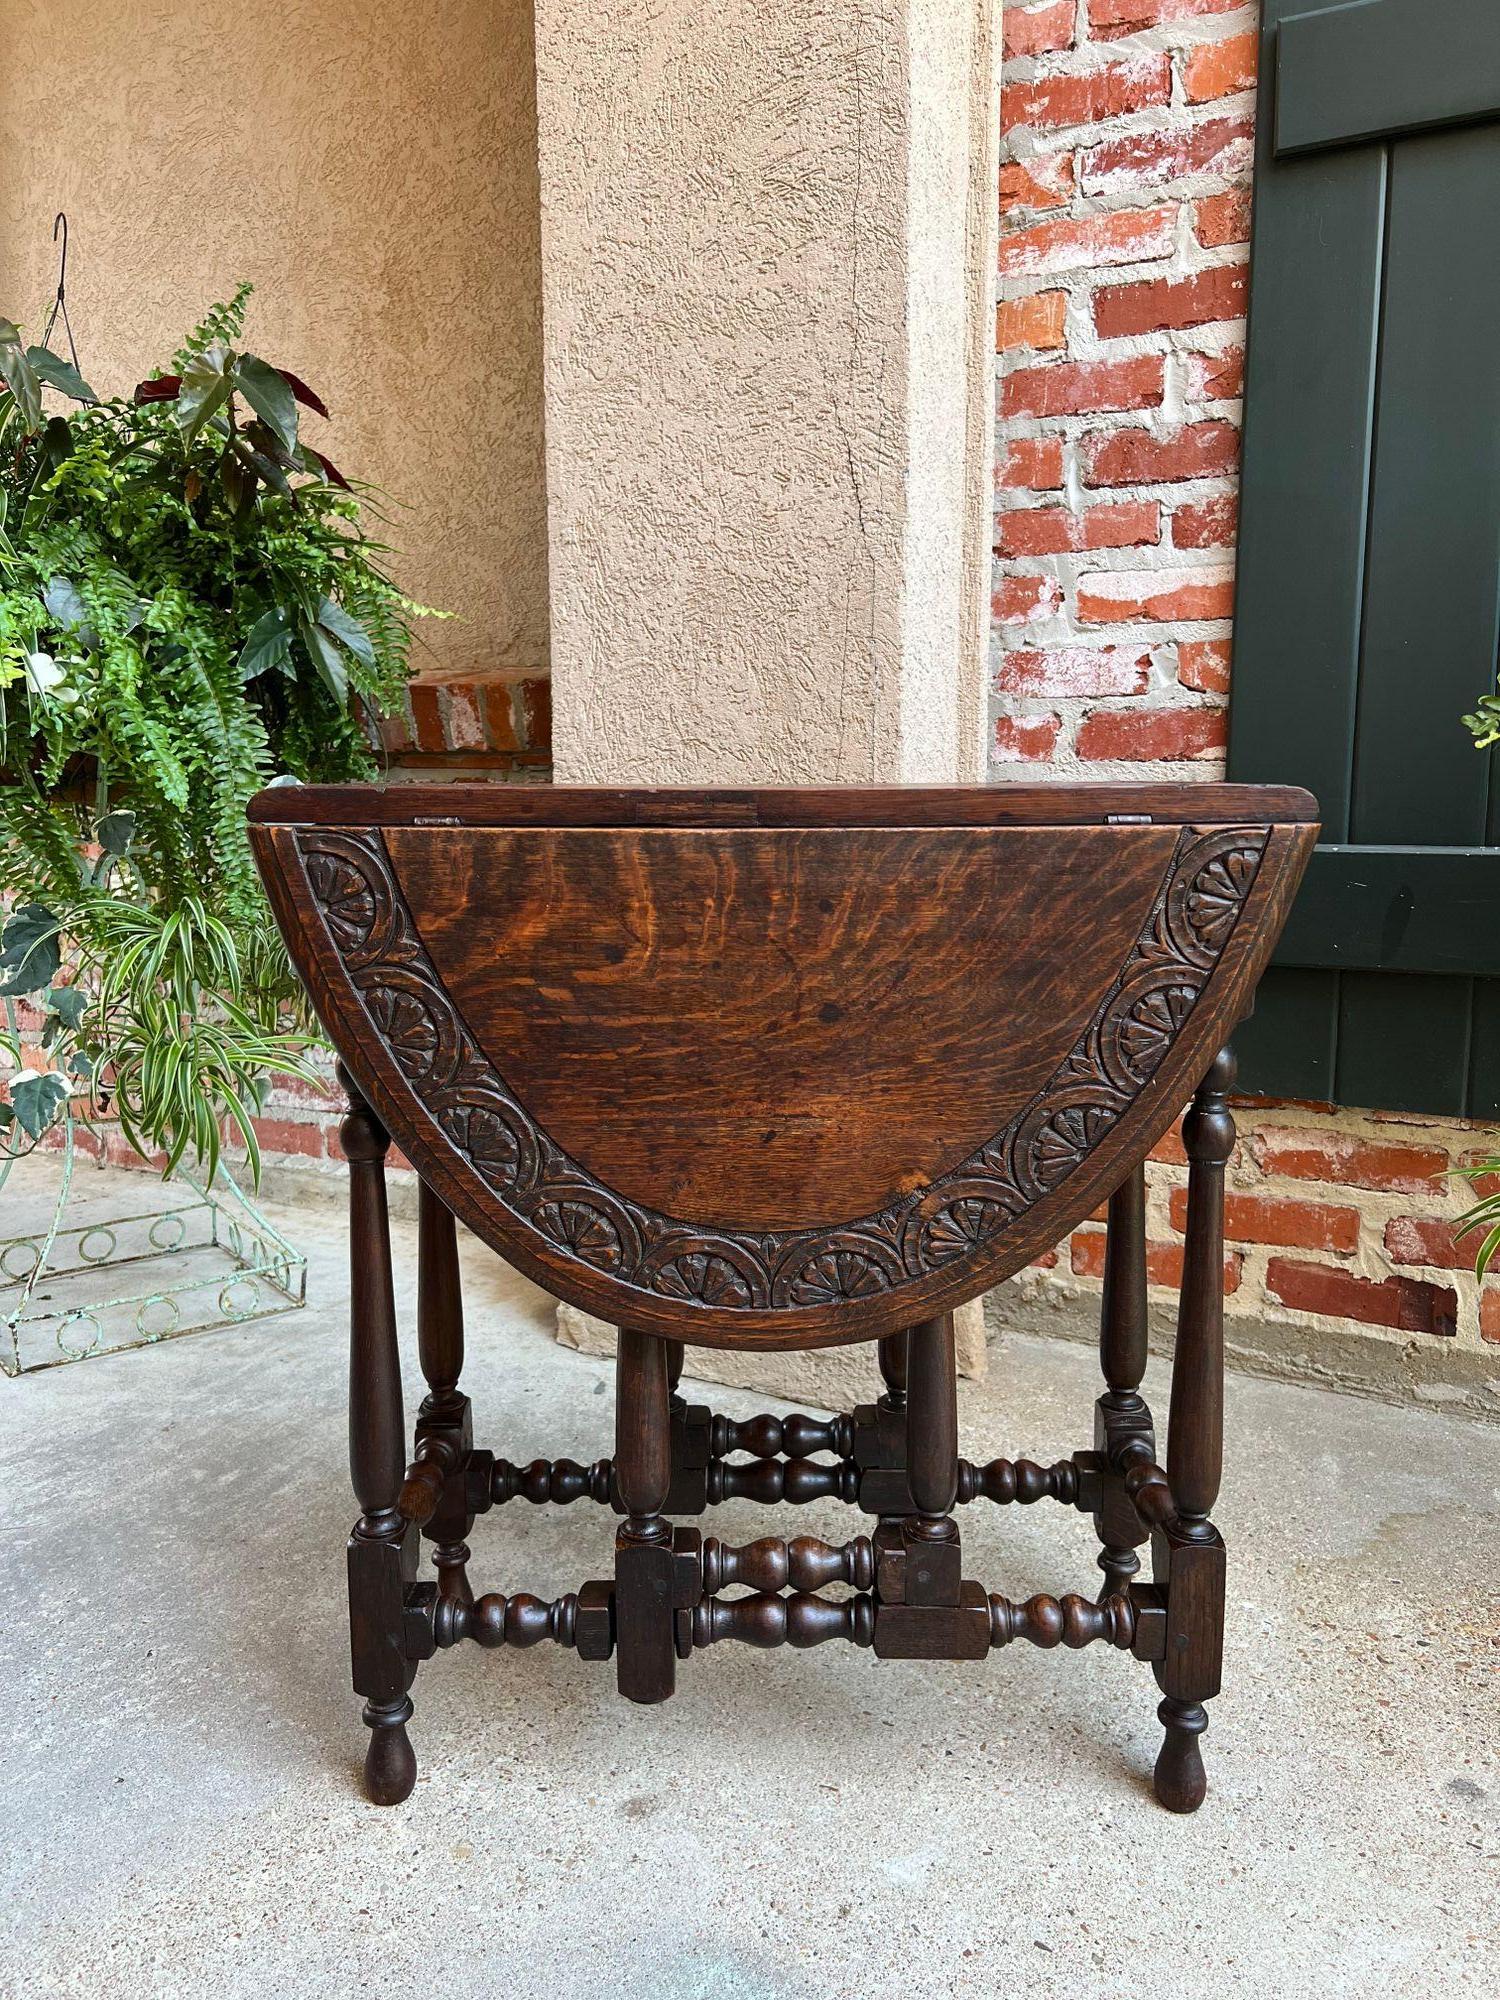 Antique English drop leaf side sofa table petite carved oak Jacobean gate leg.
 
Direct from England, (YES, our English container finally arrived, and we have some amazing English antiques, and of course, lots of barley twist)! This is a beautiful